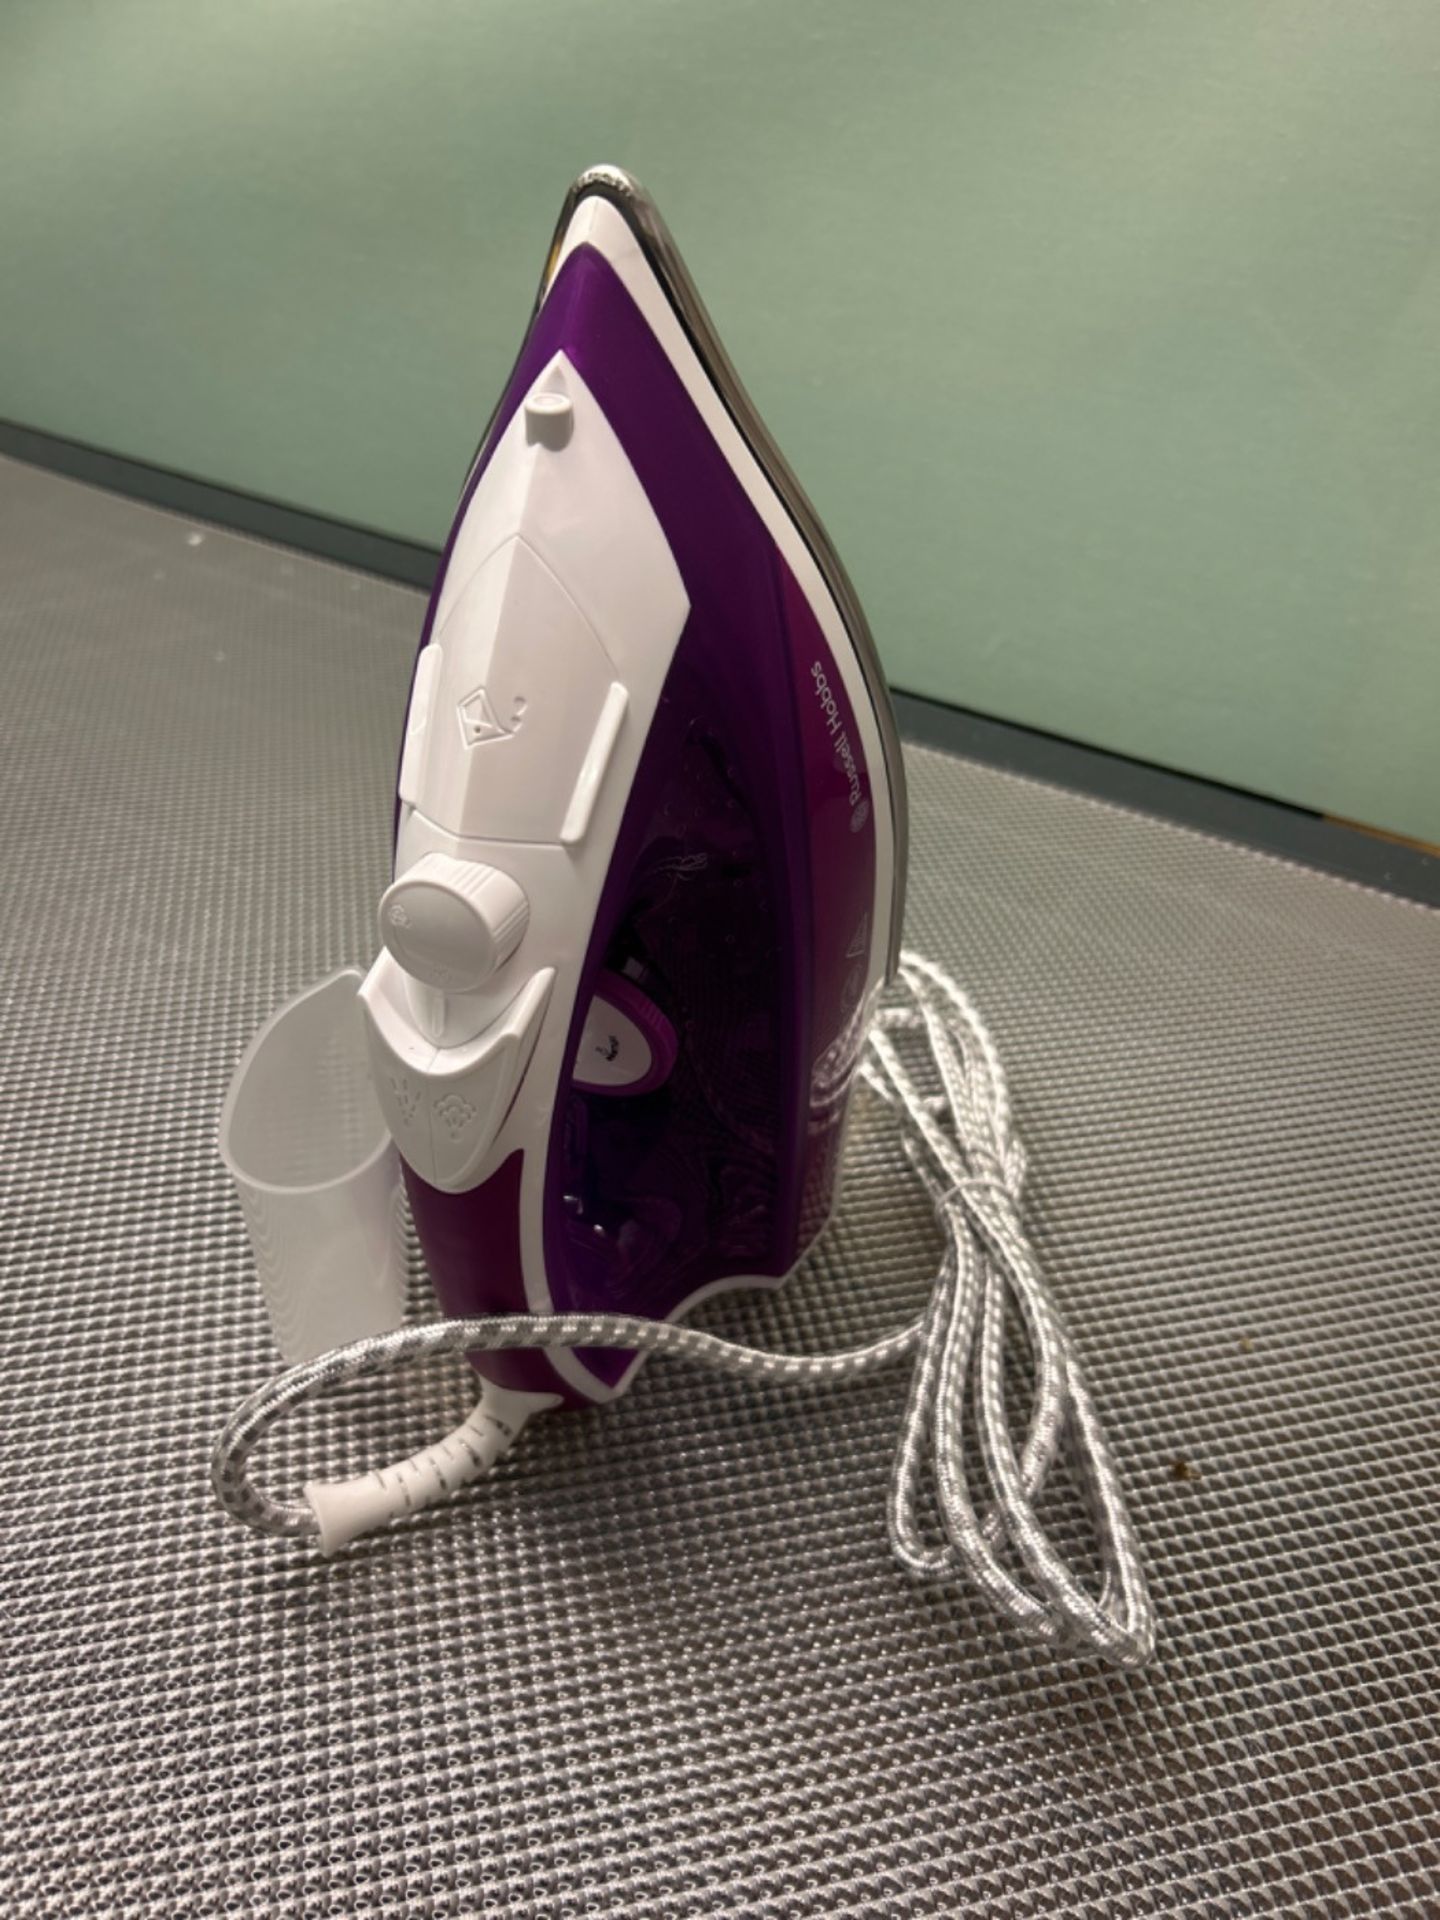 Russell Hobbs Supreme Steam Iron, Powerful vertical steam function, Non-stick stainless steel solep - Image 2 of 3